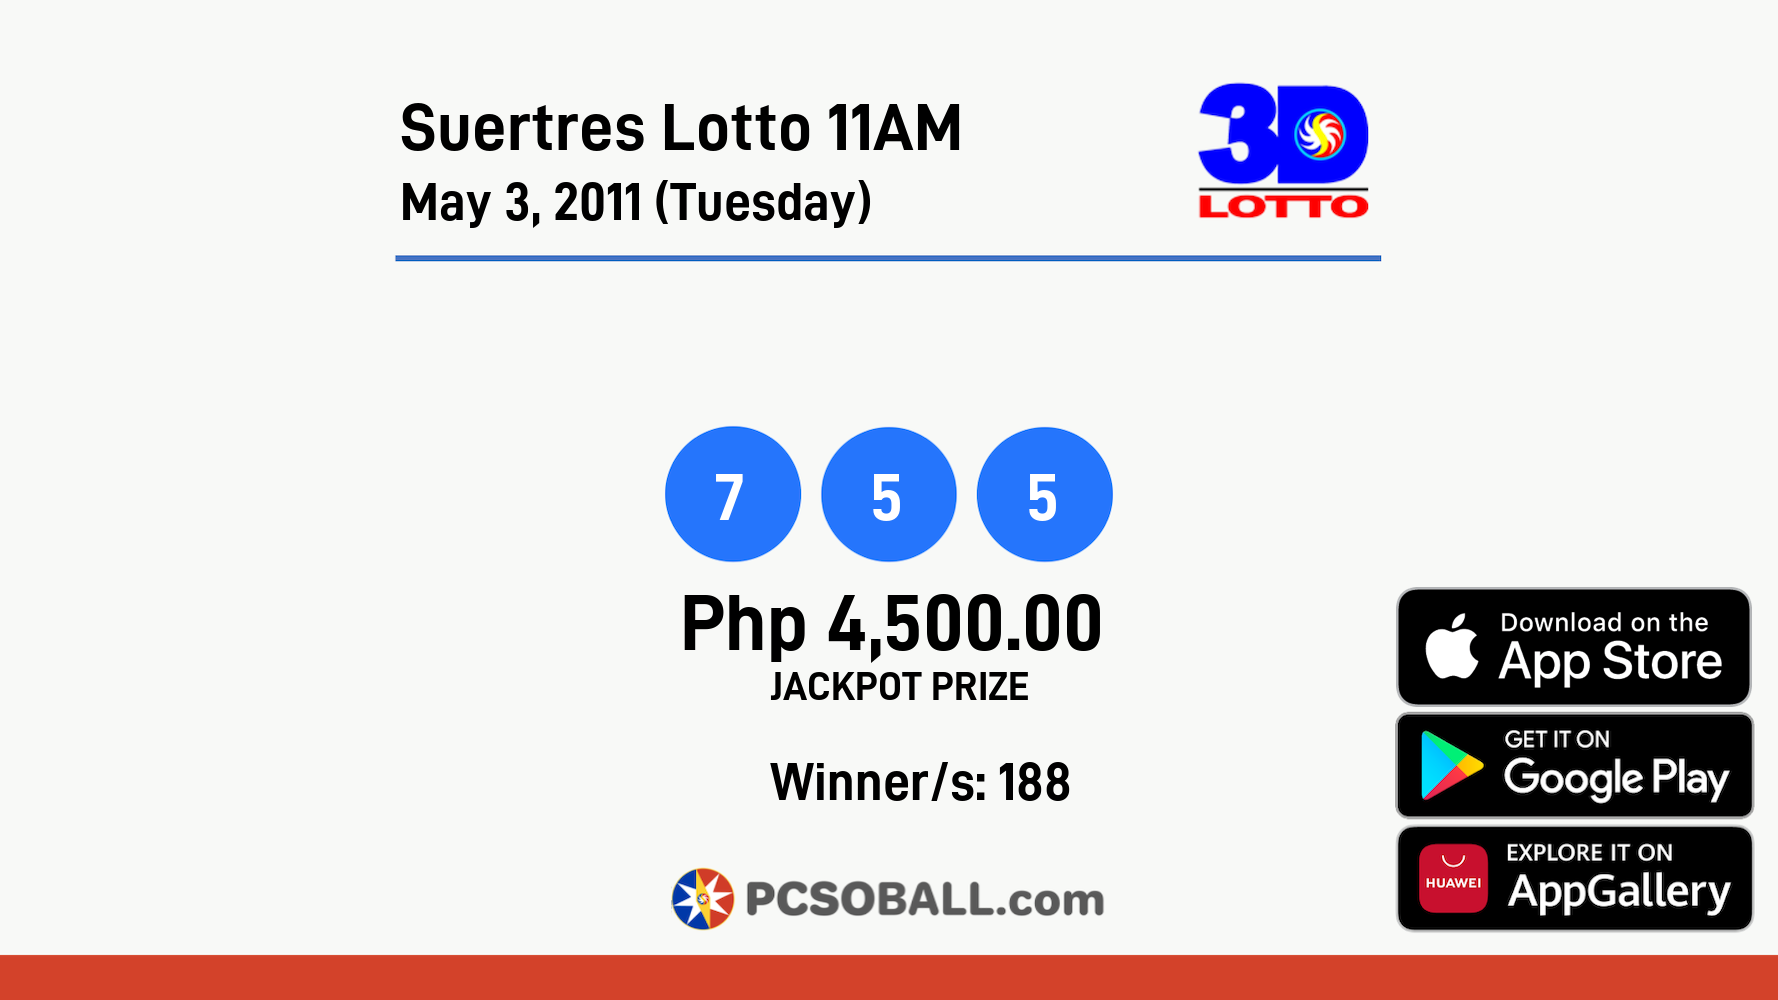 Suertres Lotto 11AM May 3, 2011 (Tuesday) Result